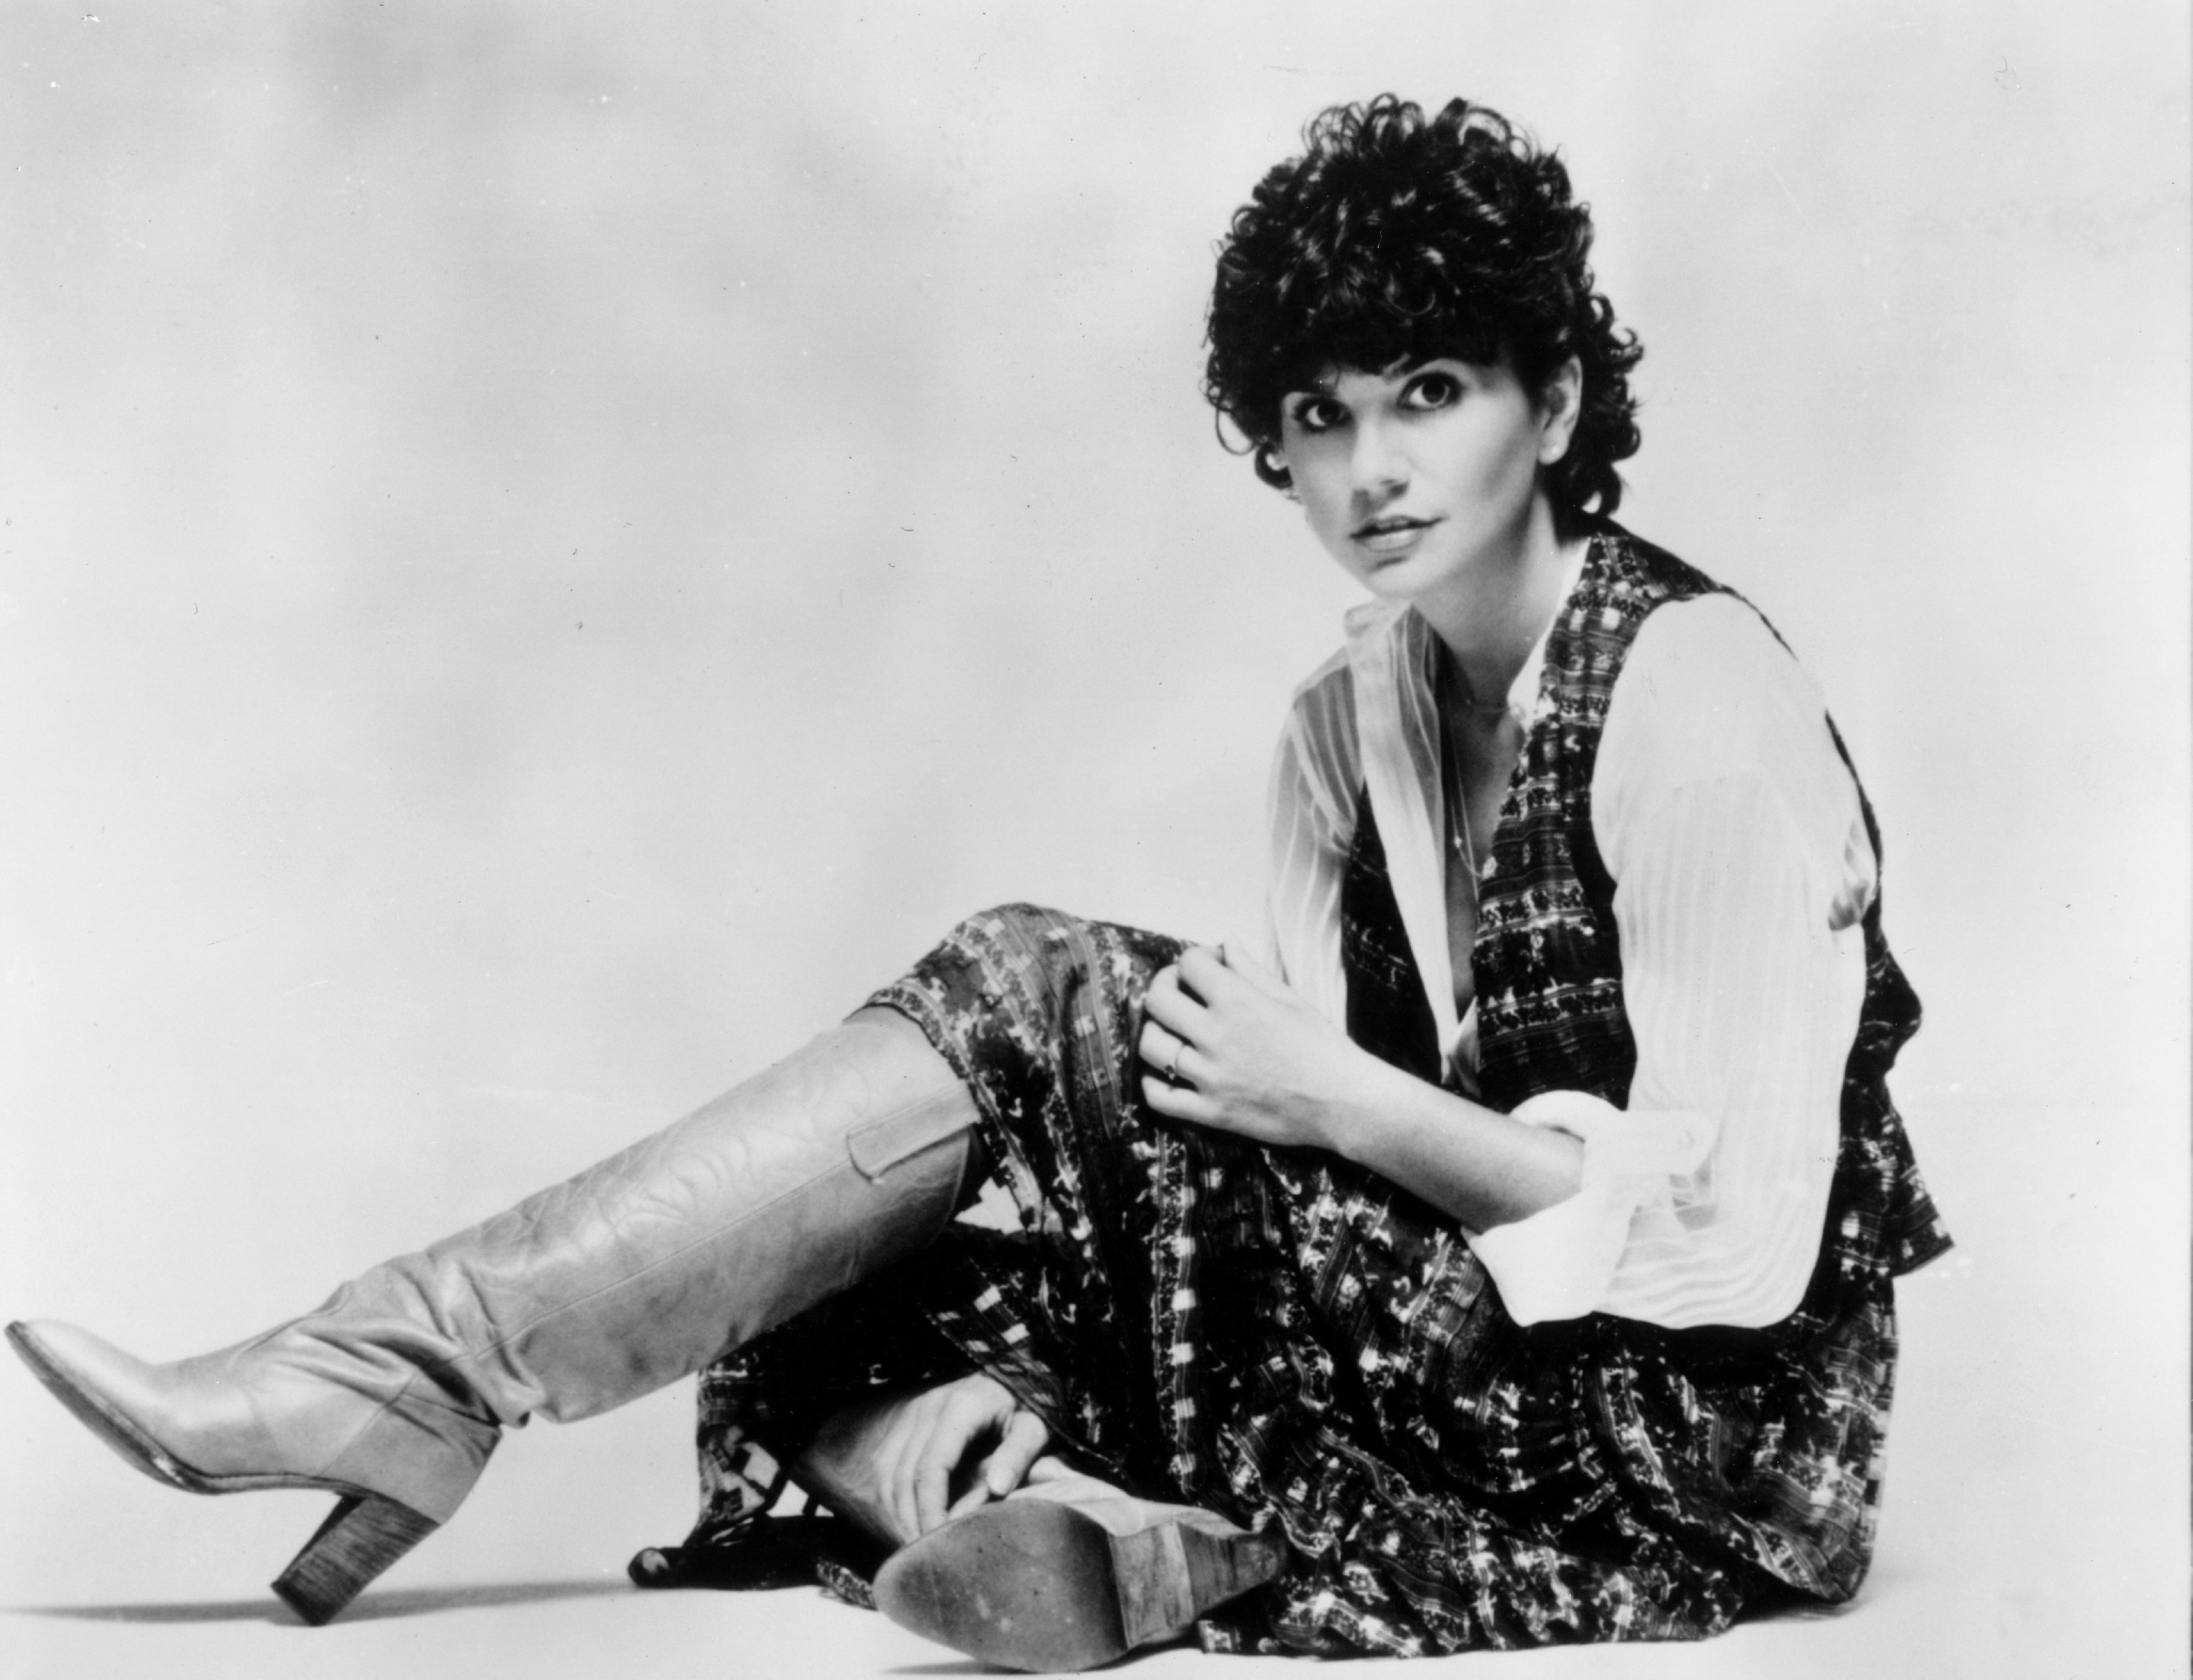 Linda Ronstadt wearing boots and sitting on a floor